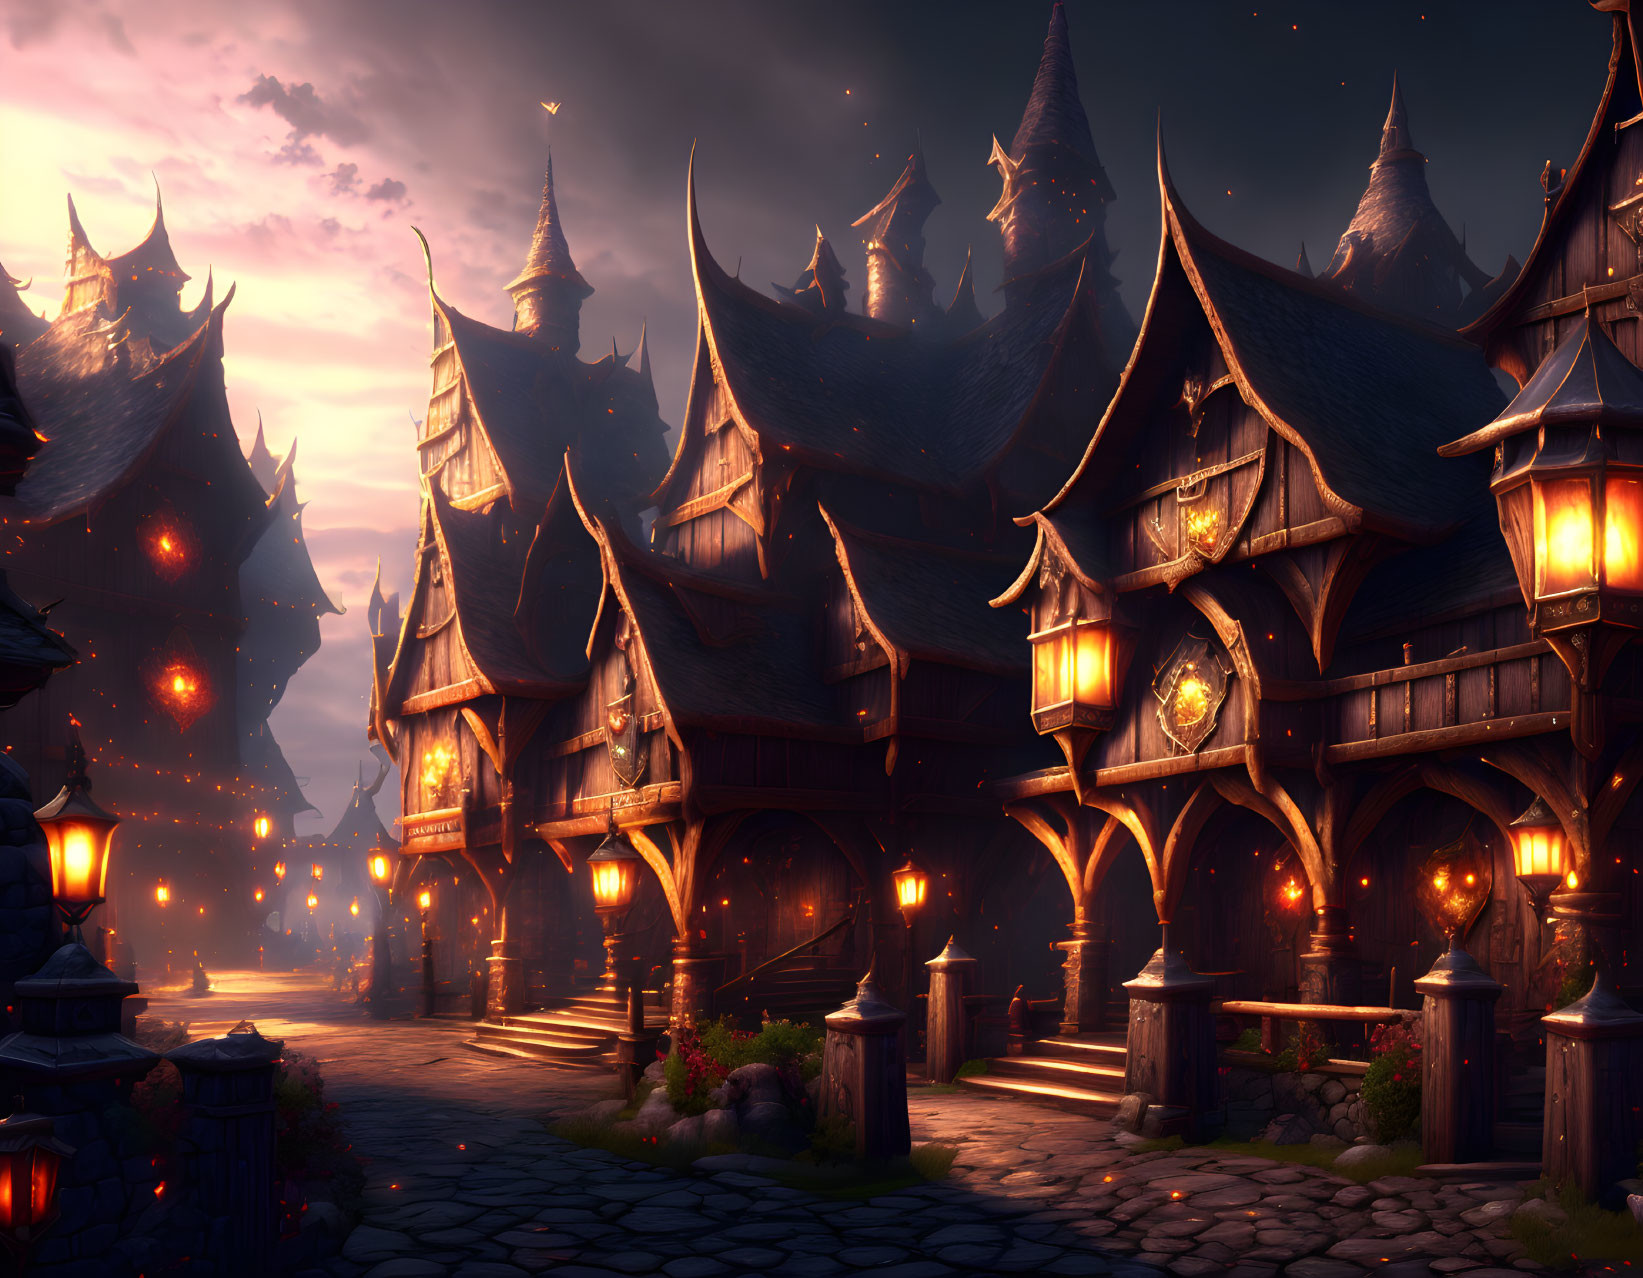 Medieval fantasy village at twilight with illuminated buildings against mountain backdrop